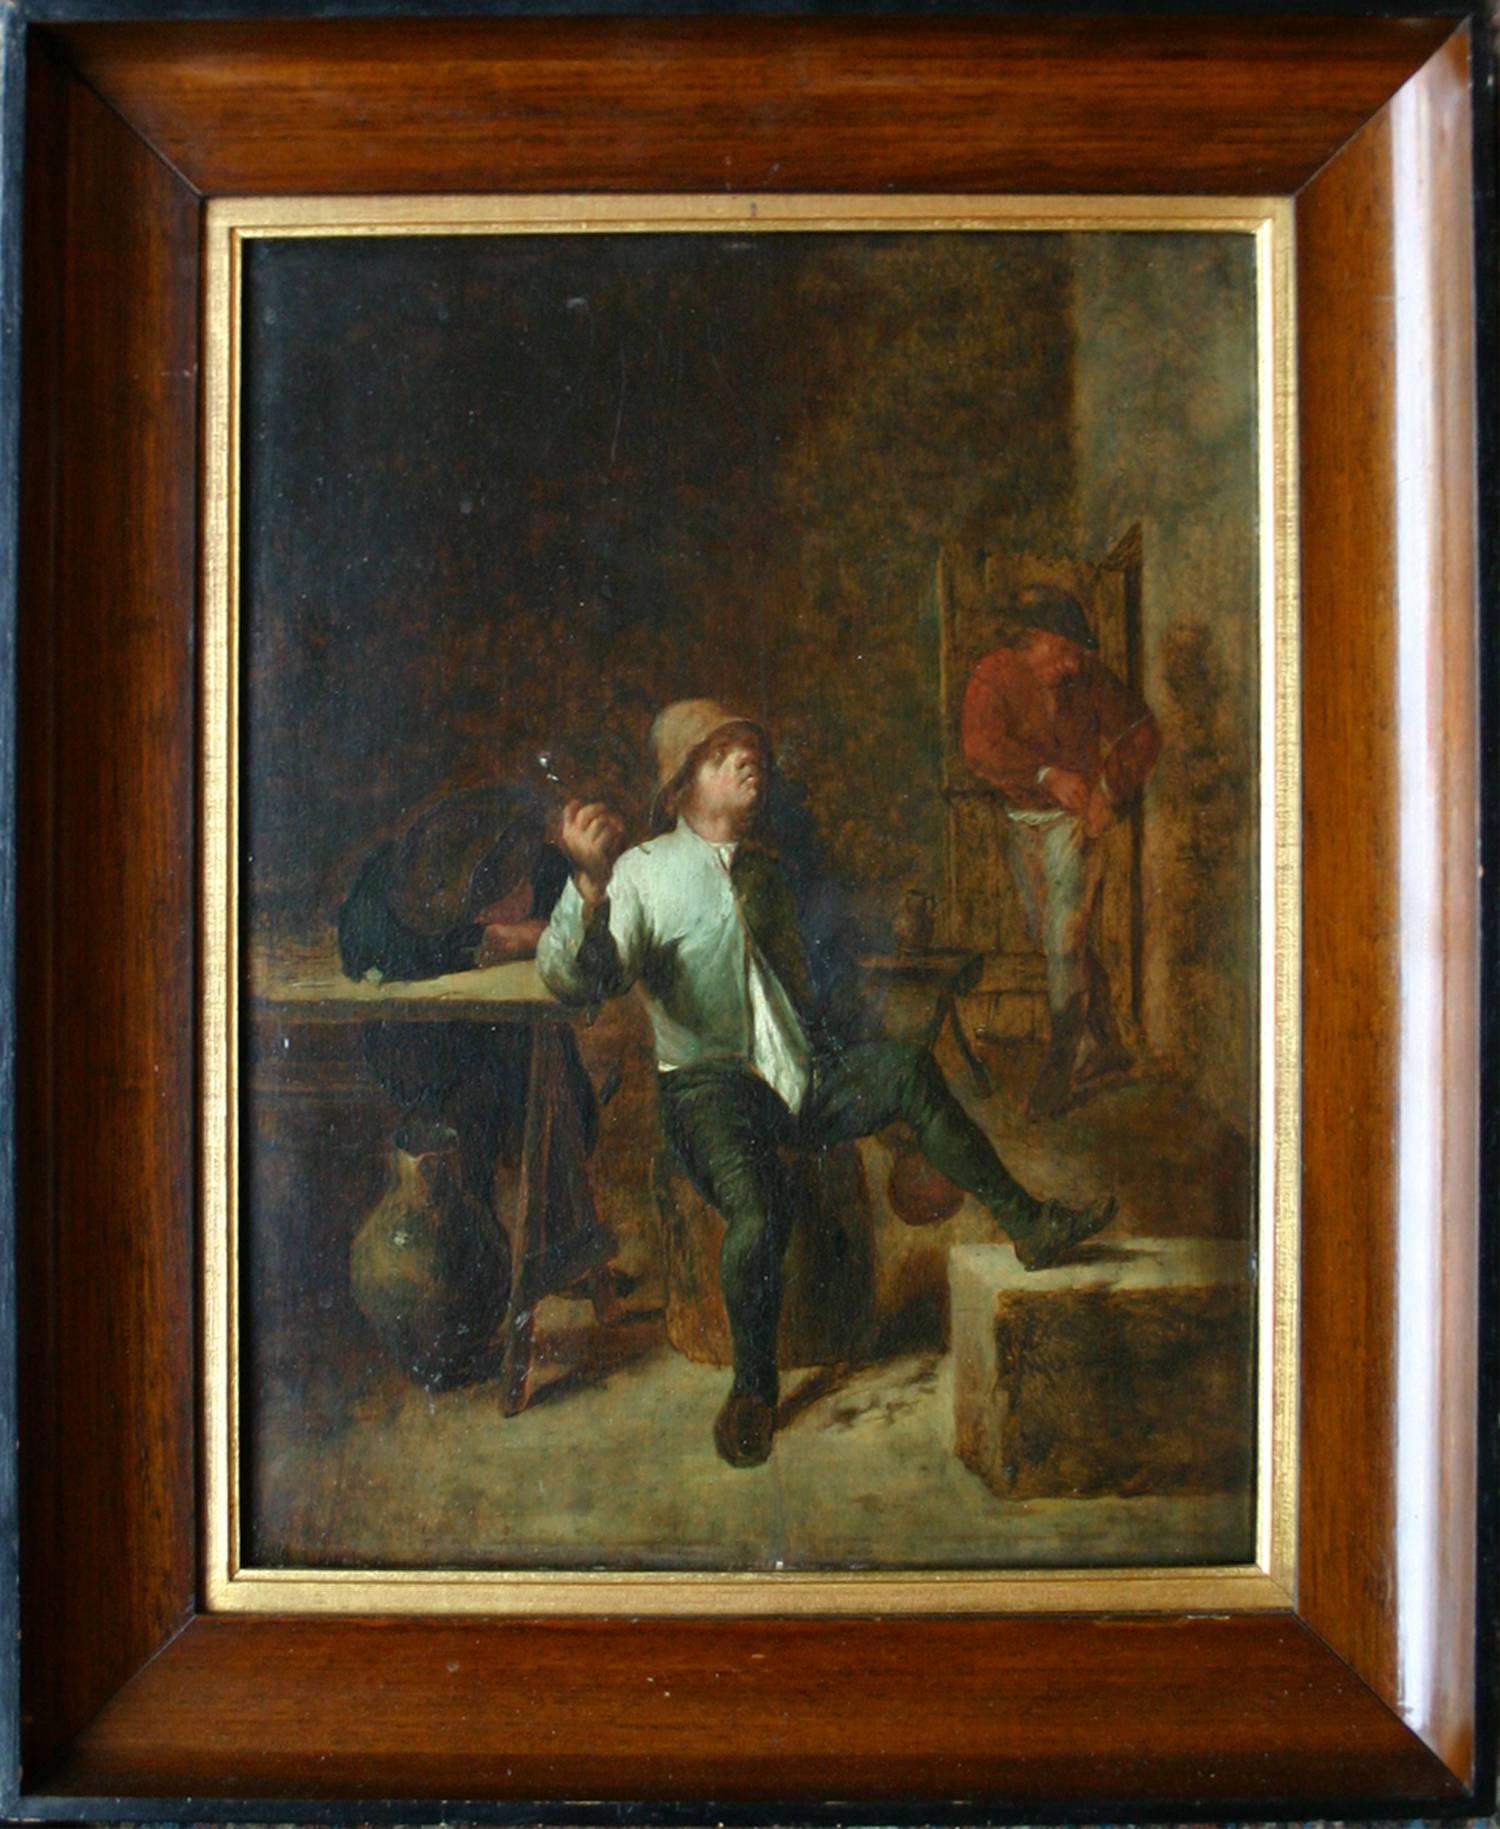 Smokers in a Tavern - Painting by David Teniers the Younger